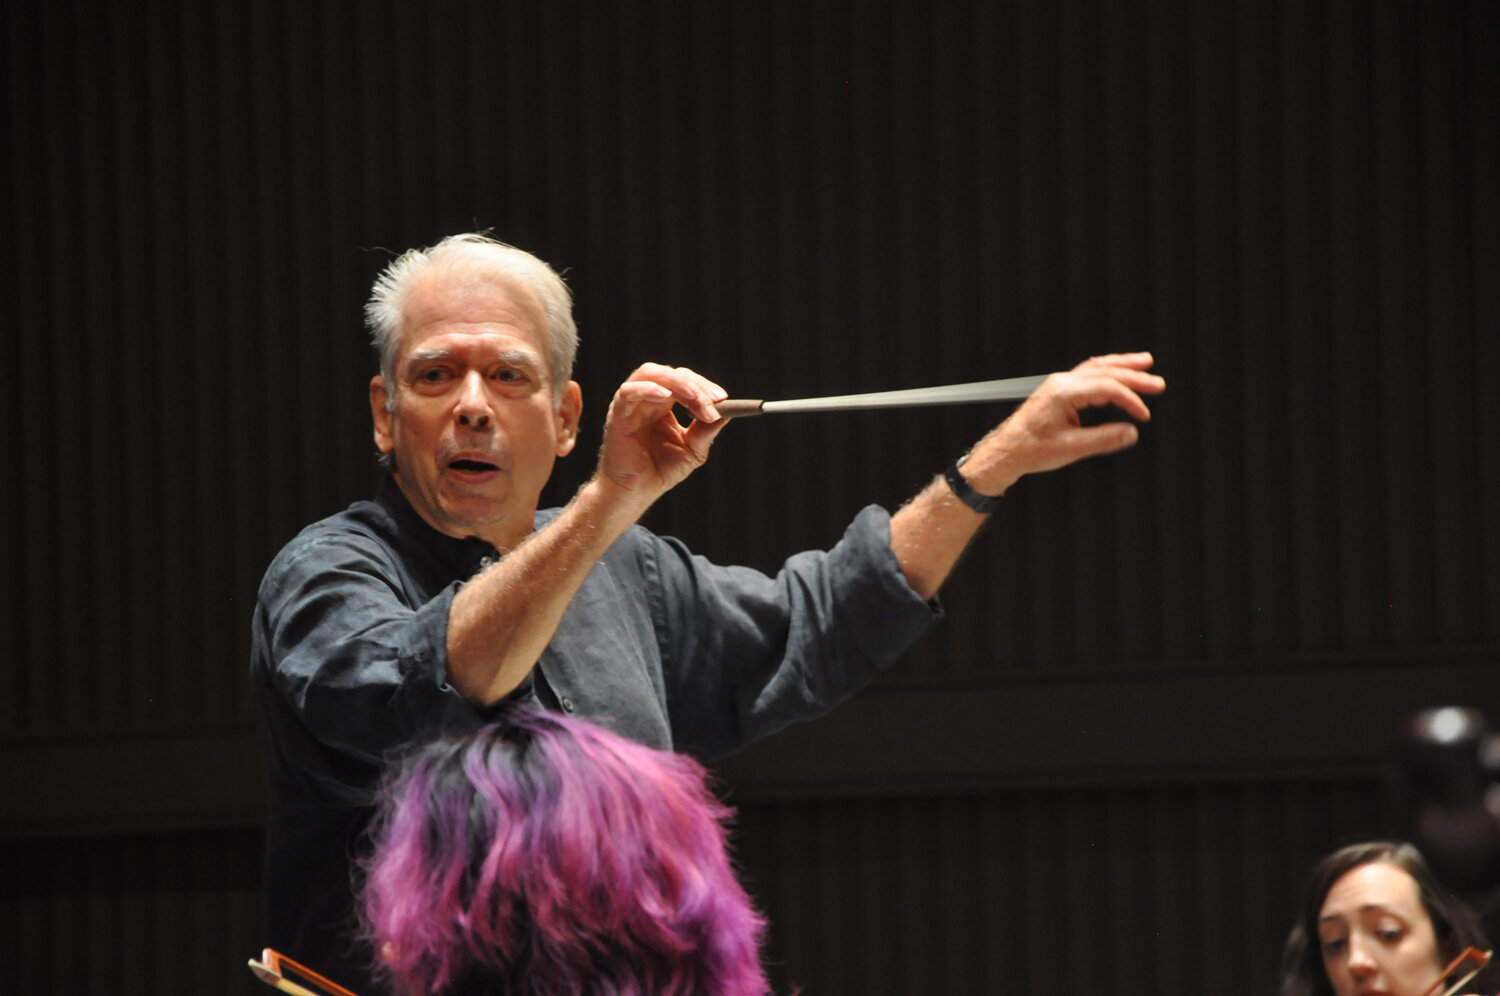 Maestro Scott Jackson Wiley will pick up his baton one more time as conductor of the South Shore Symphony Orchestra  for their annual concert at St. Agnes Cathedral.